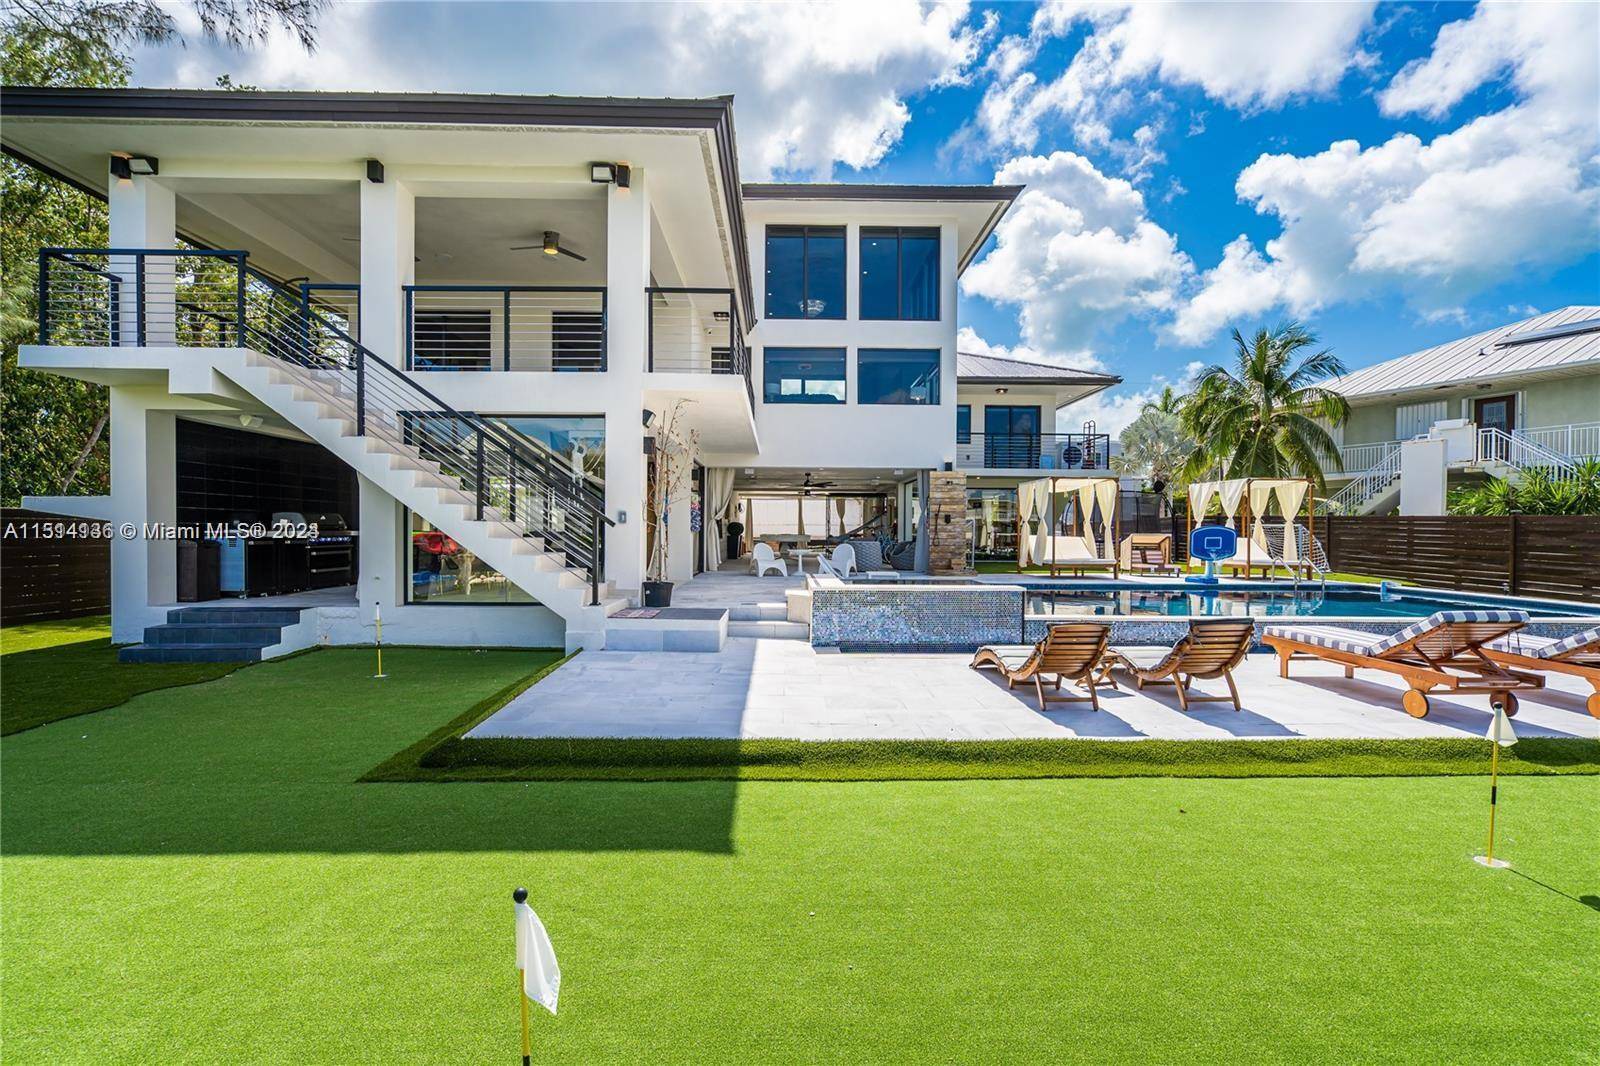 Escape to paradise in this ultra luxe Key Largo home, where every whim is met and serenity reigns.